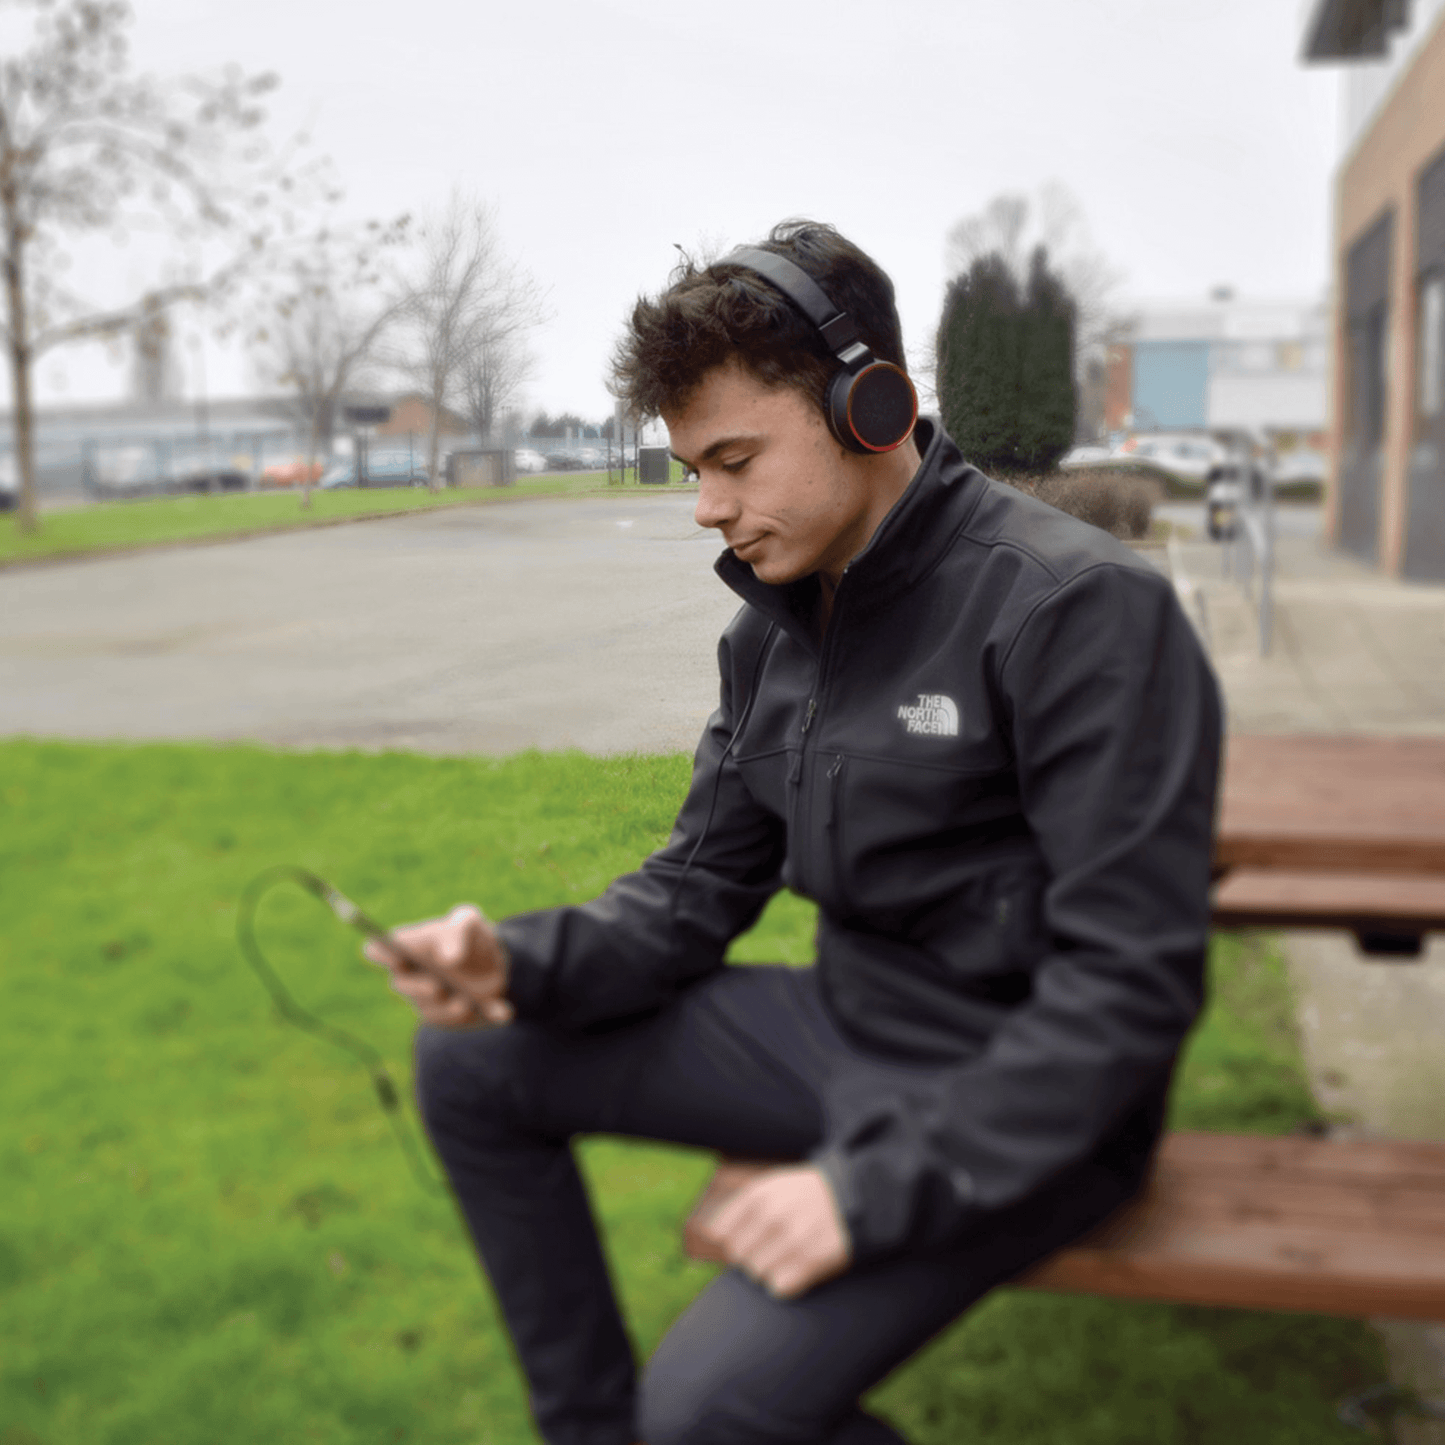 boy wearing headphones connected to a phone